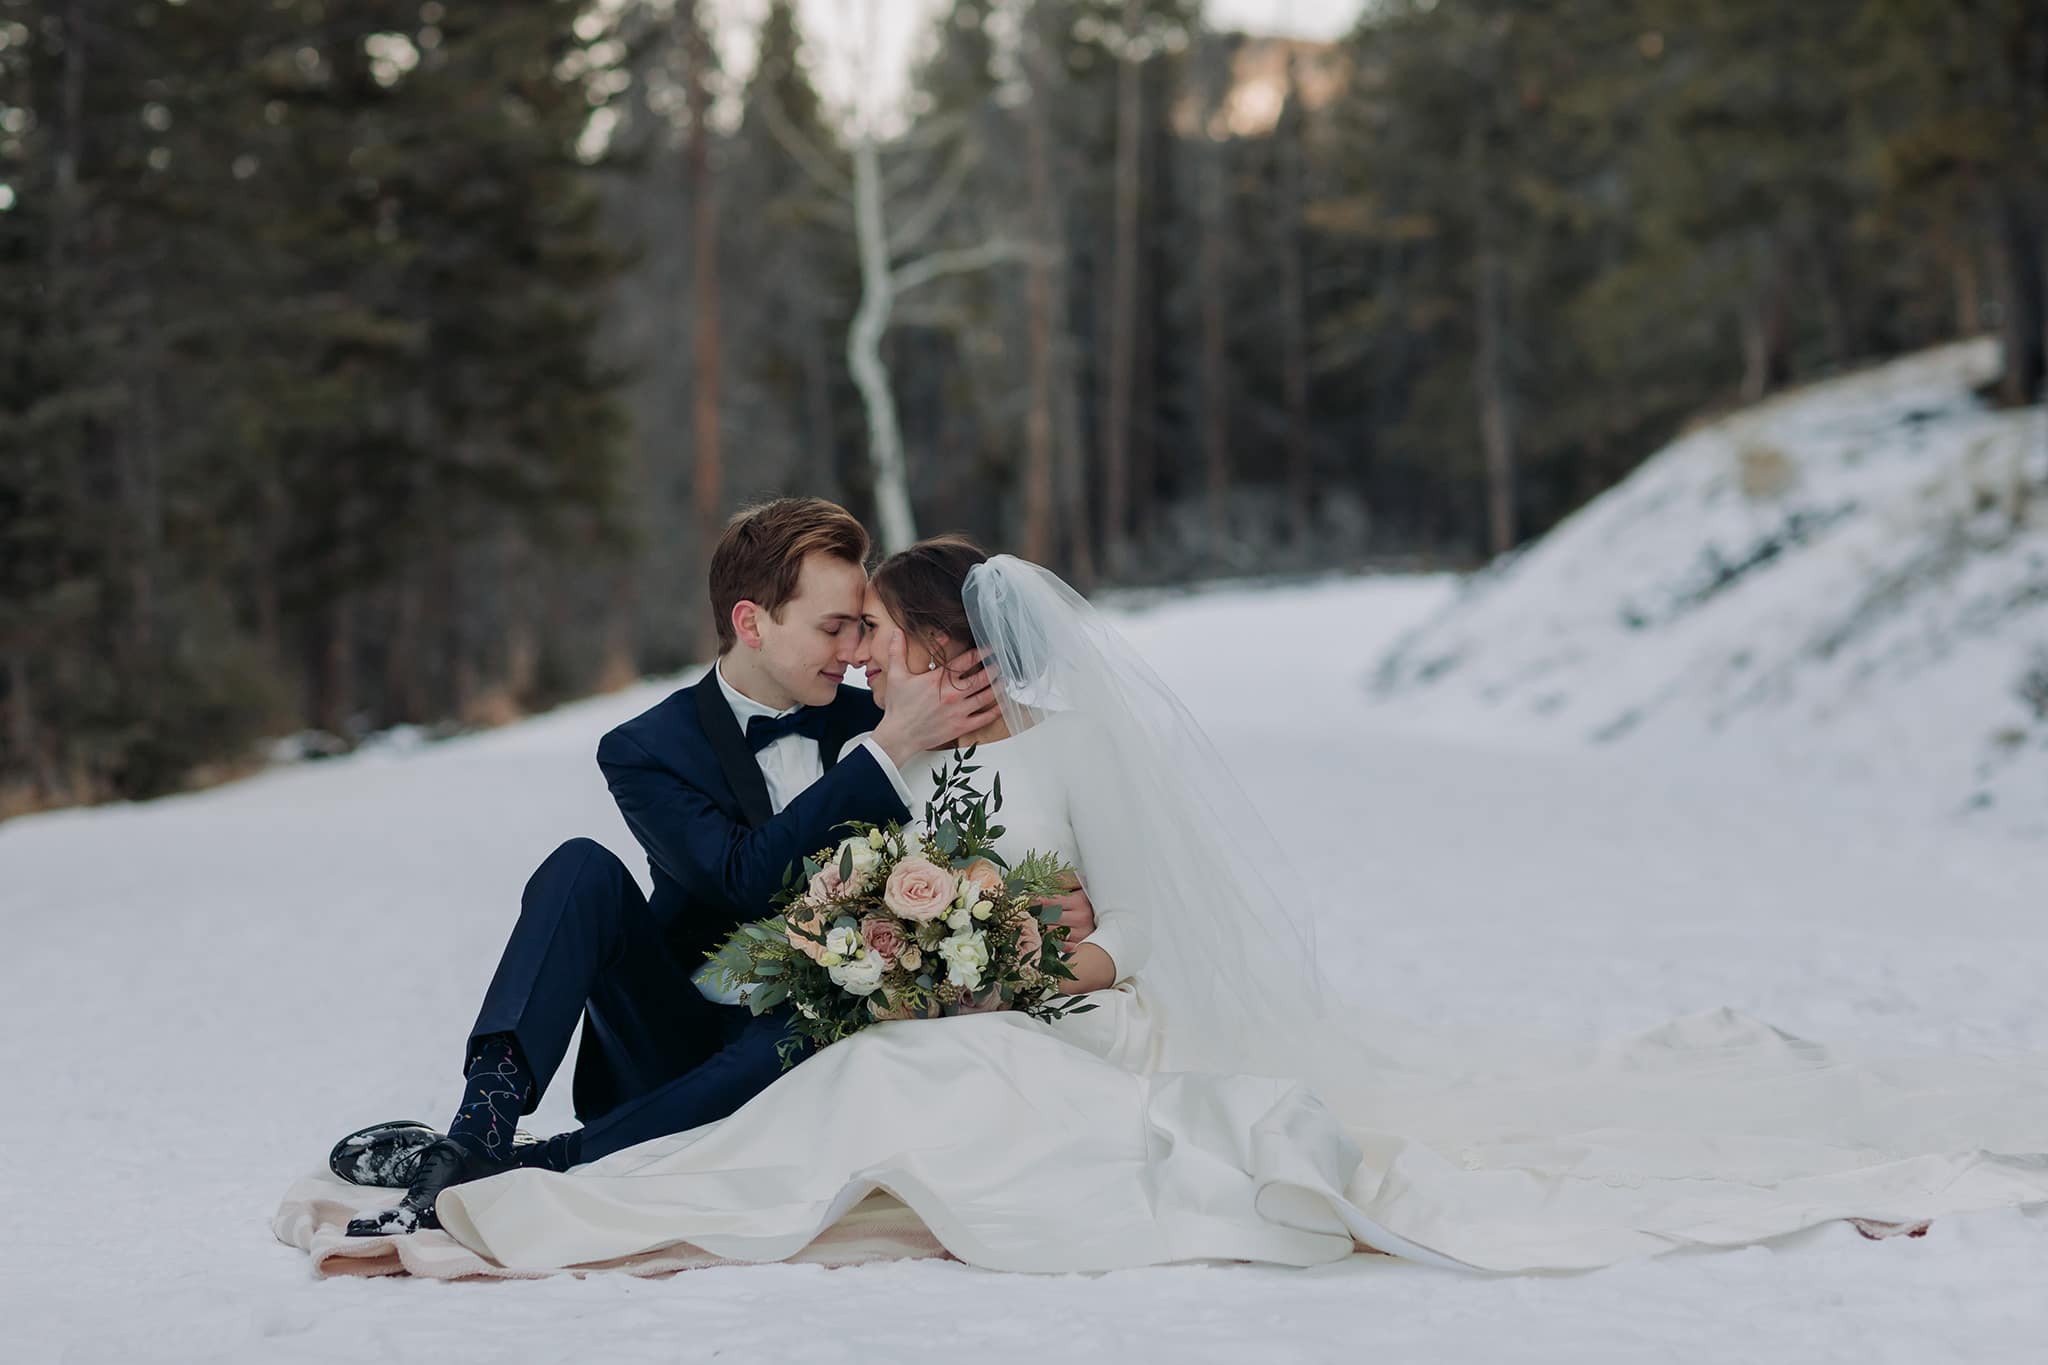 bride groom sitting in snow-covered road on wedding day in Banff National Park winter wedding